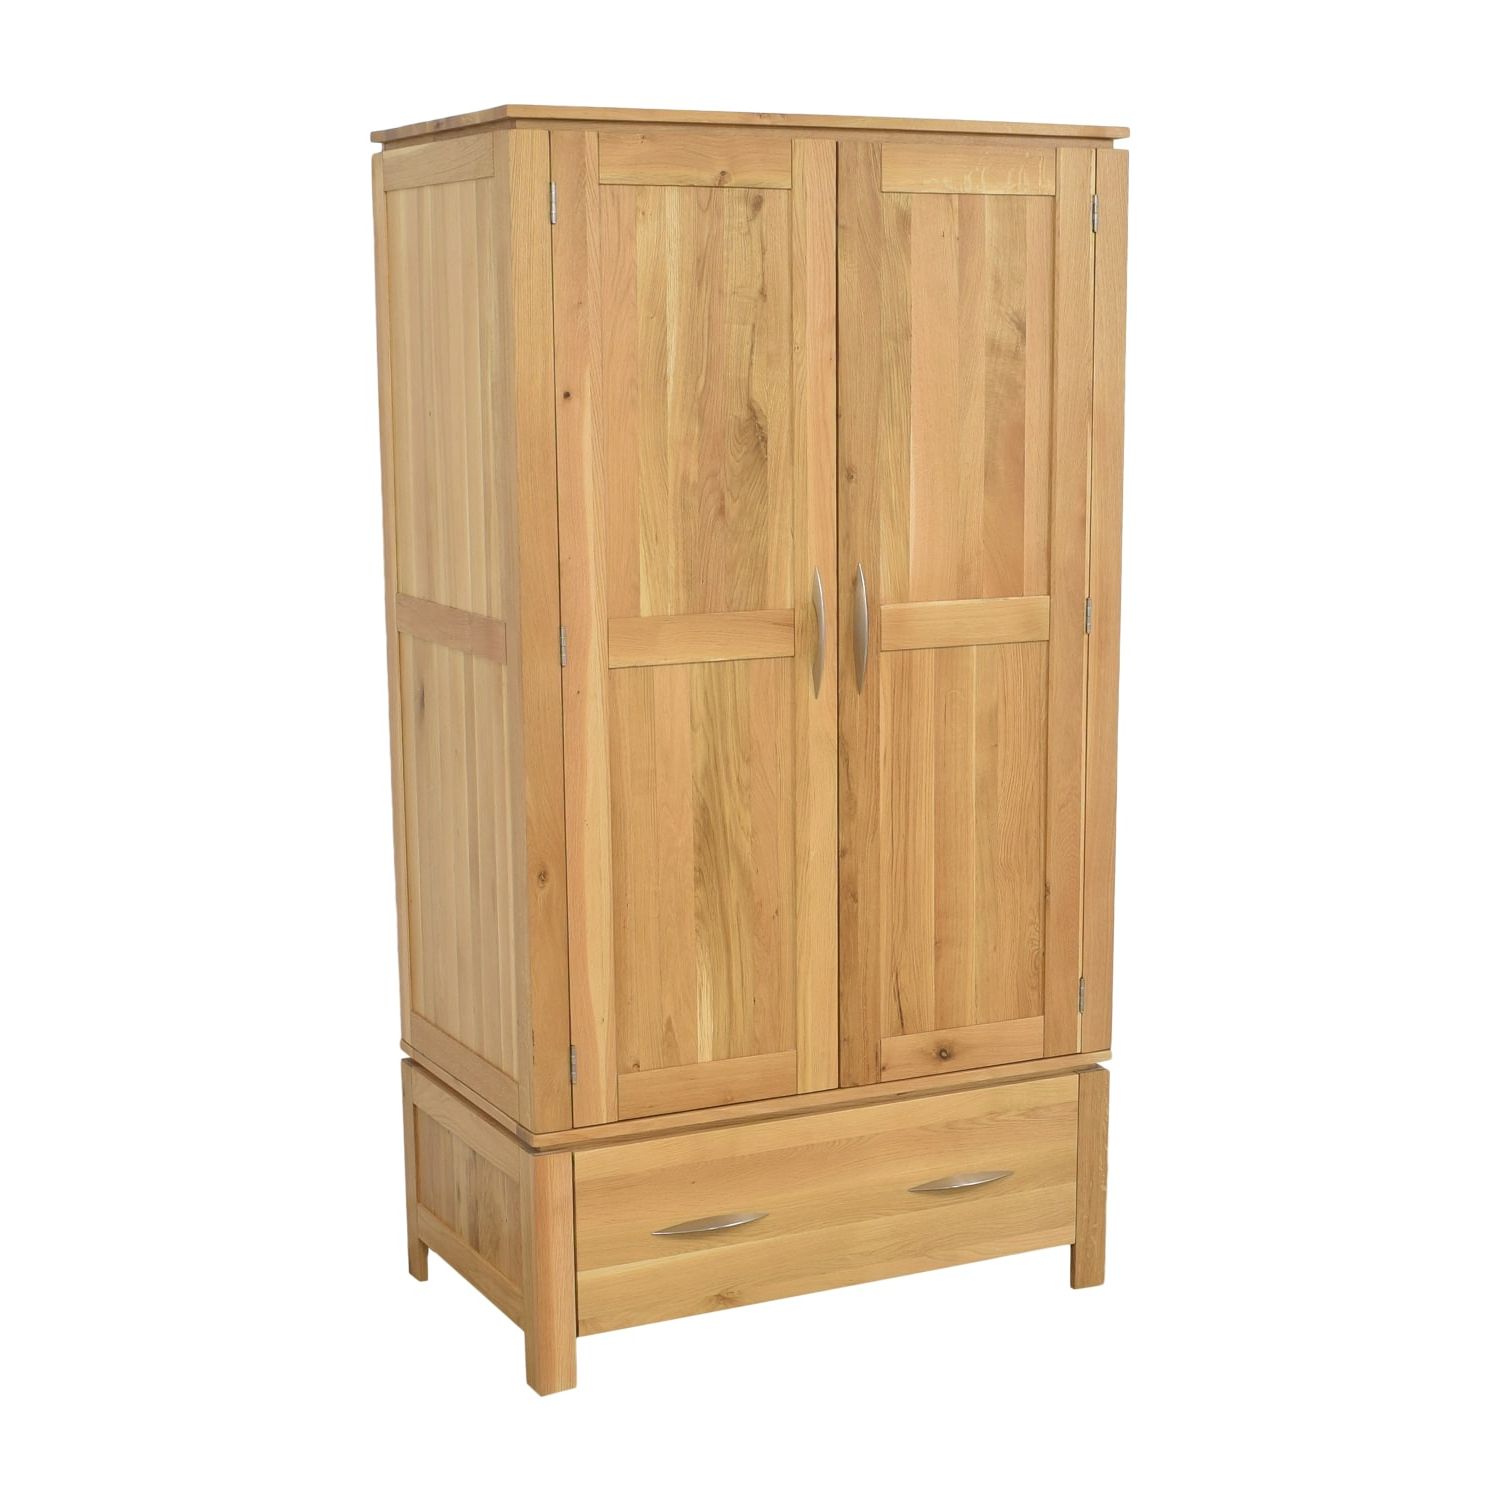 Oak Furnitureland Single Drawer Rustic Armoire | 49% Off | Kaiyo With Single Oak Wardrobes With Drawers (Gallery 11 of 20)